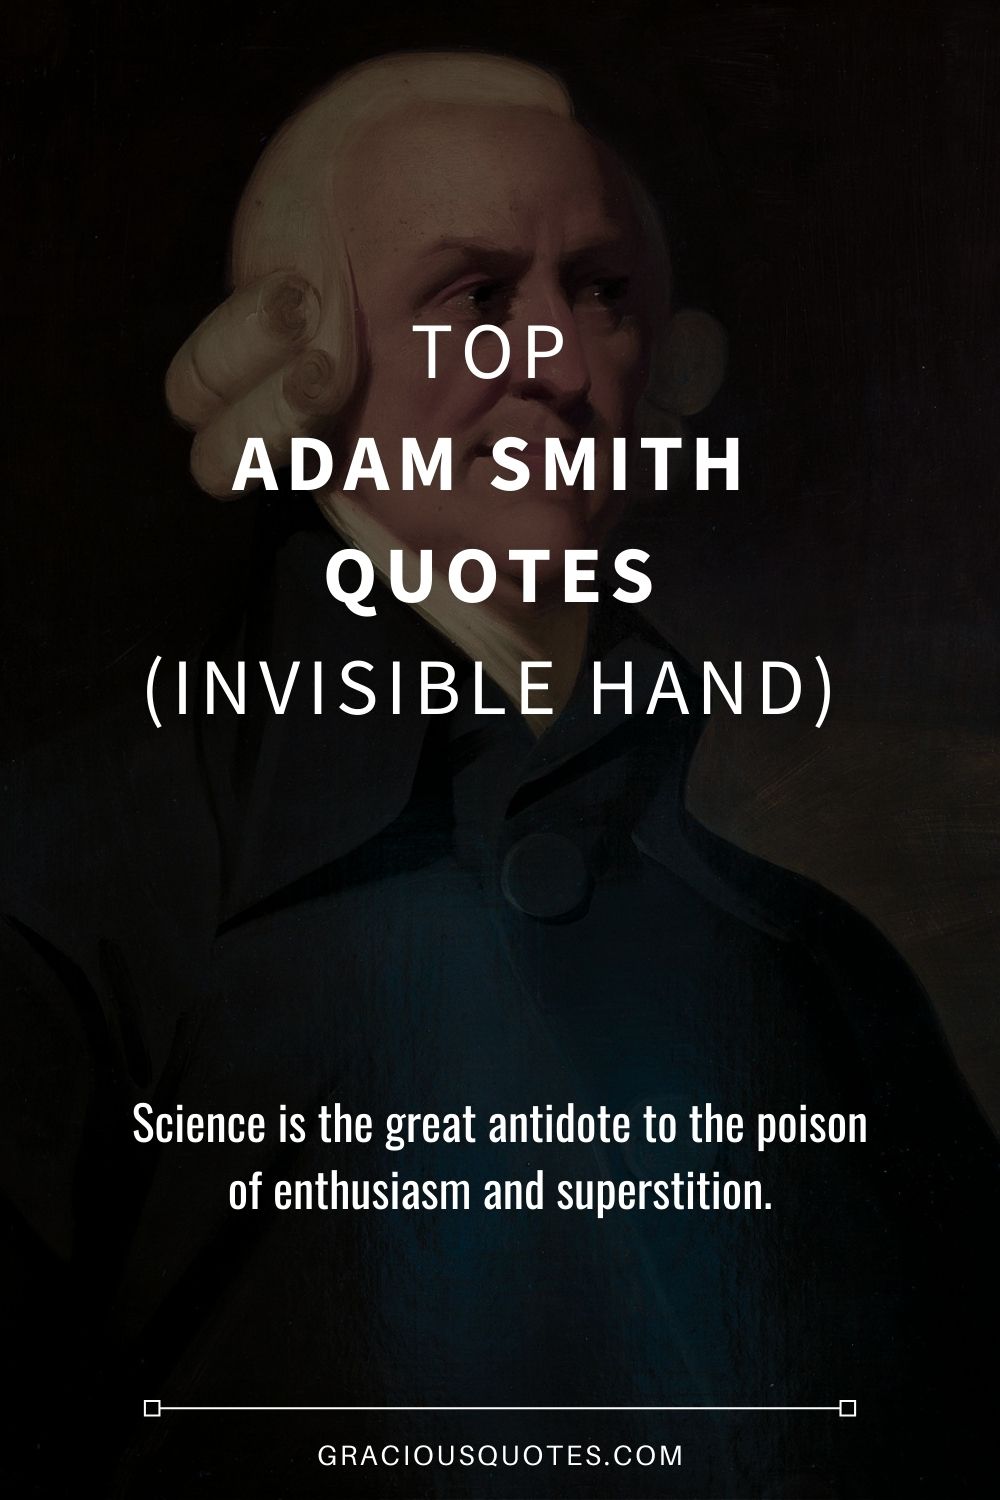 Top Adam Smith Quotes (INVISIBLE HAND) - Gracious Quotes